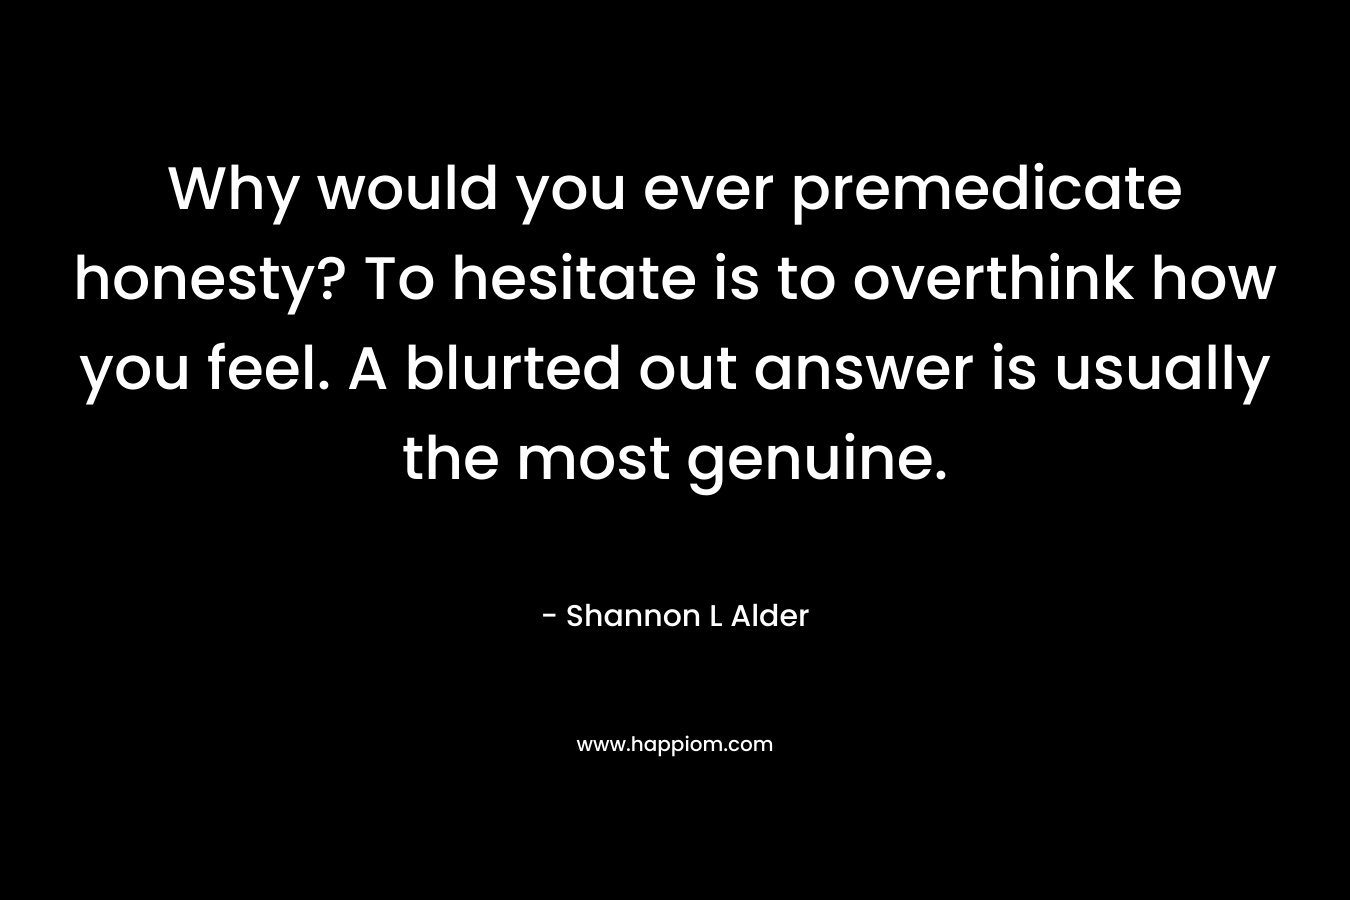 Why would you ever premedicate honesty? To hesitate is to overthink how you feel. A blurted out answer is usually the most genuine. – Shannon L Alder